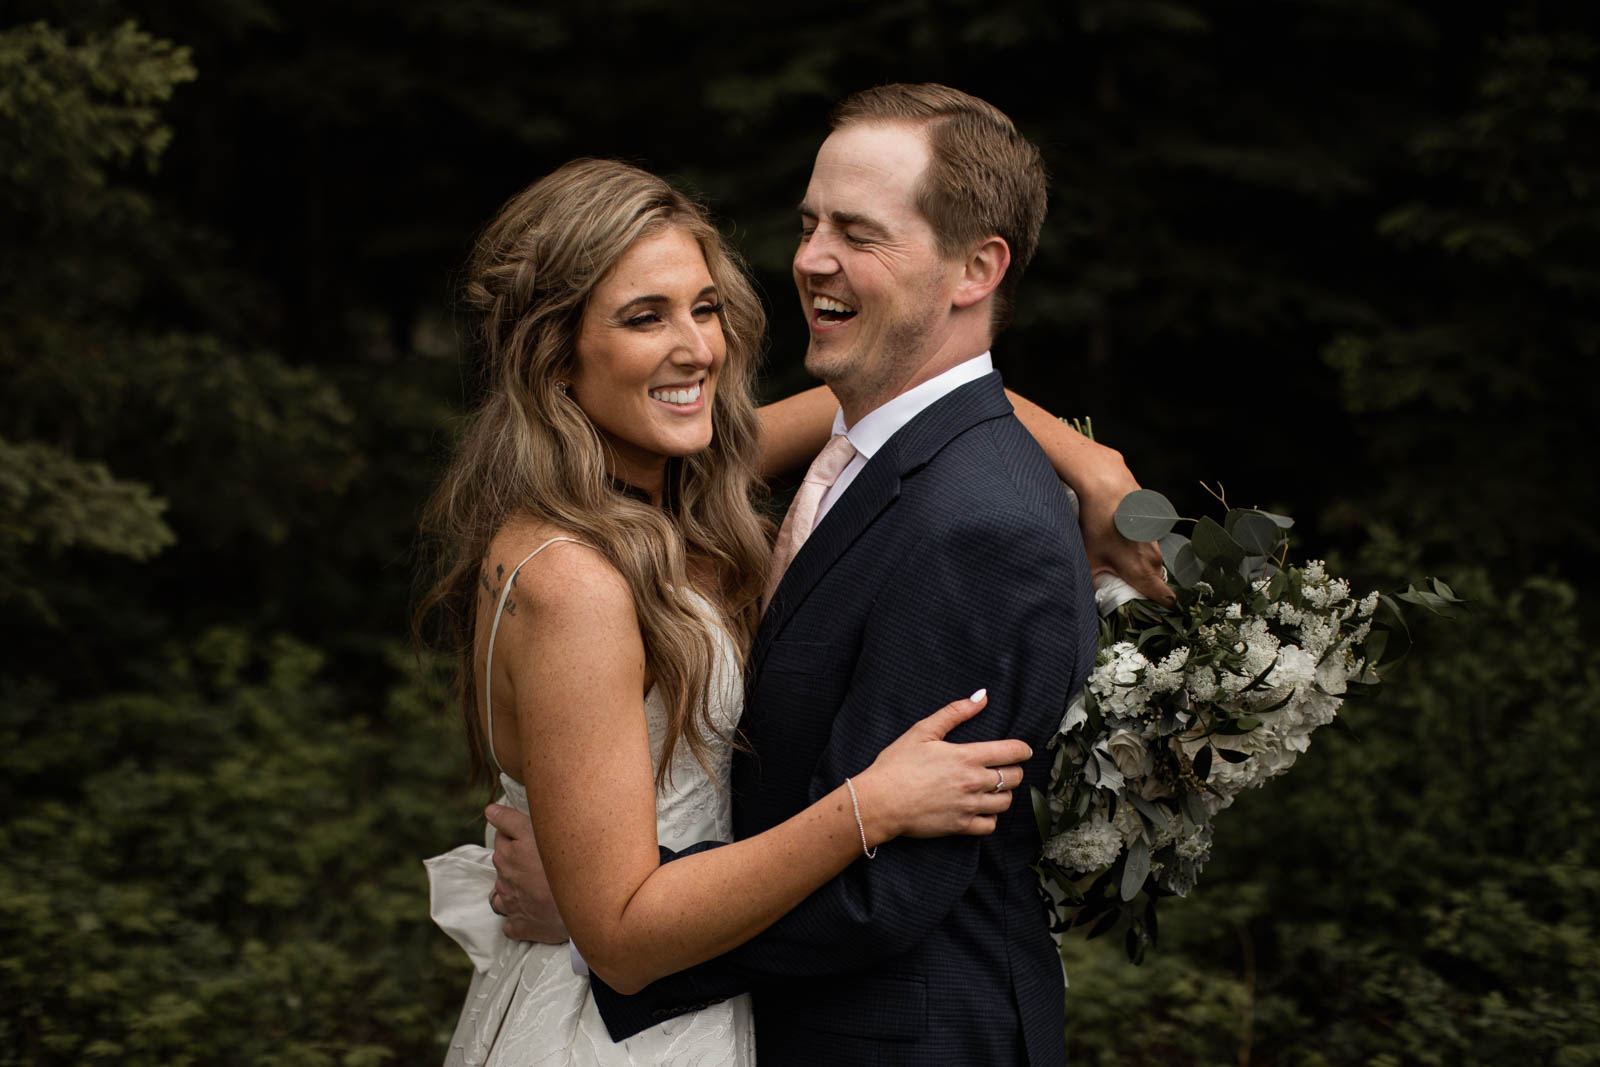 canmore cornerstone wedding- willow and wolf wedding photographer